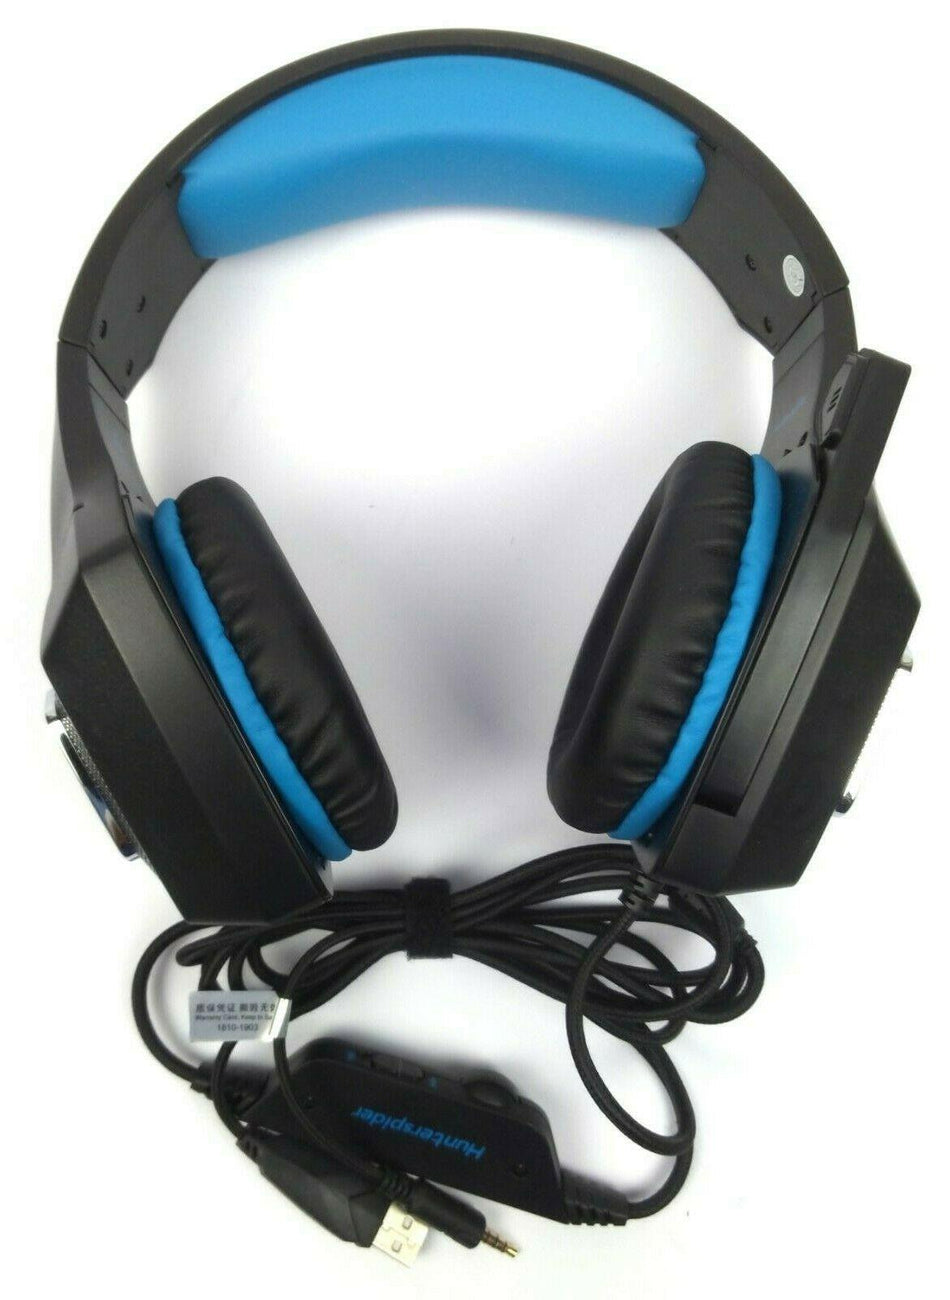 Hunterspider V-1 Pro Gaming RGB Headset Compatible with PS4 Xbox One Laptops